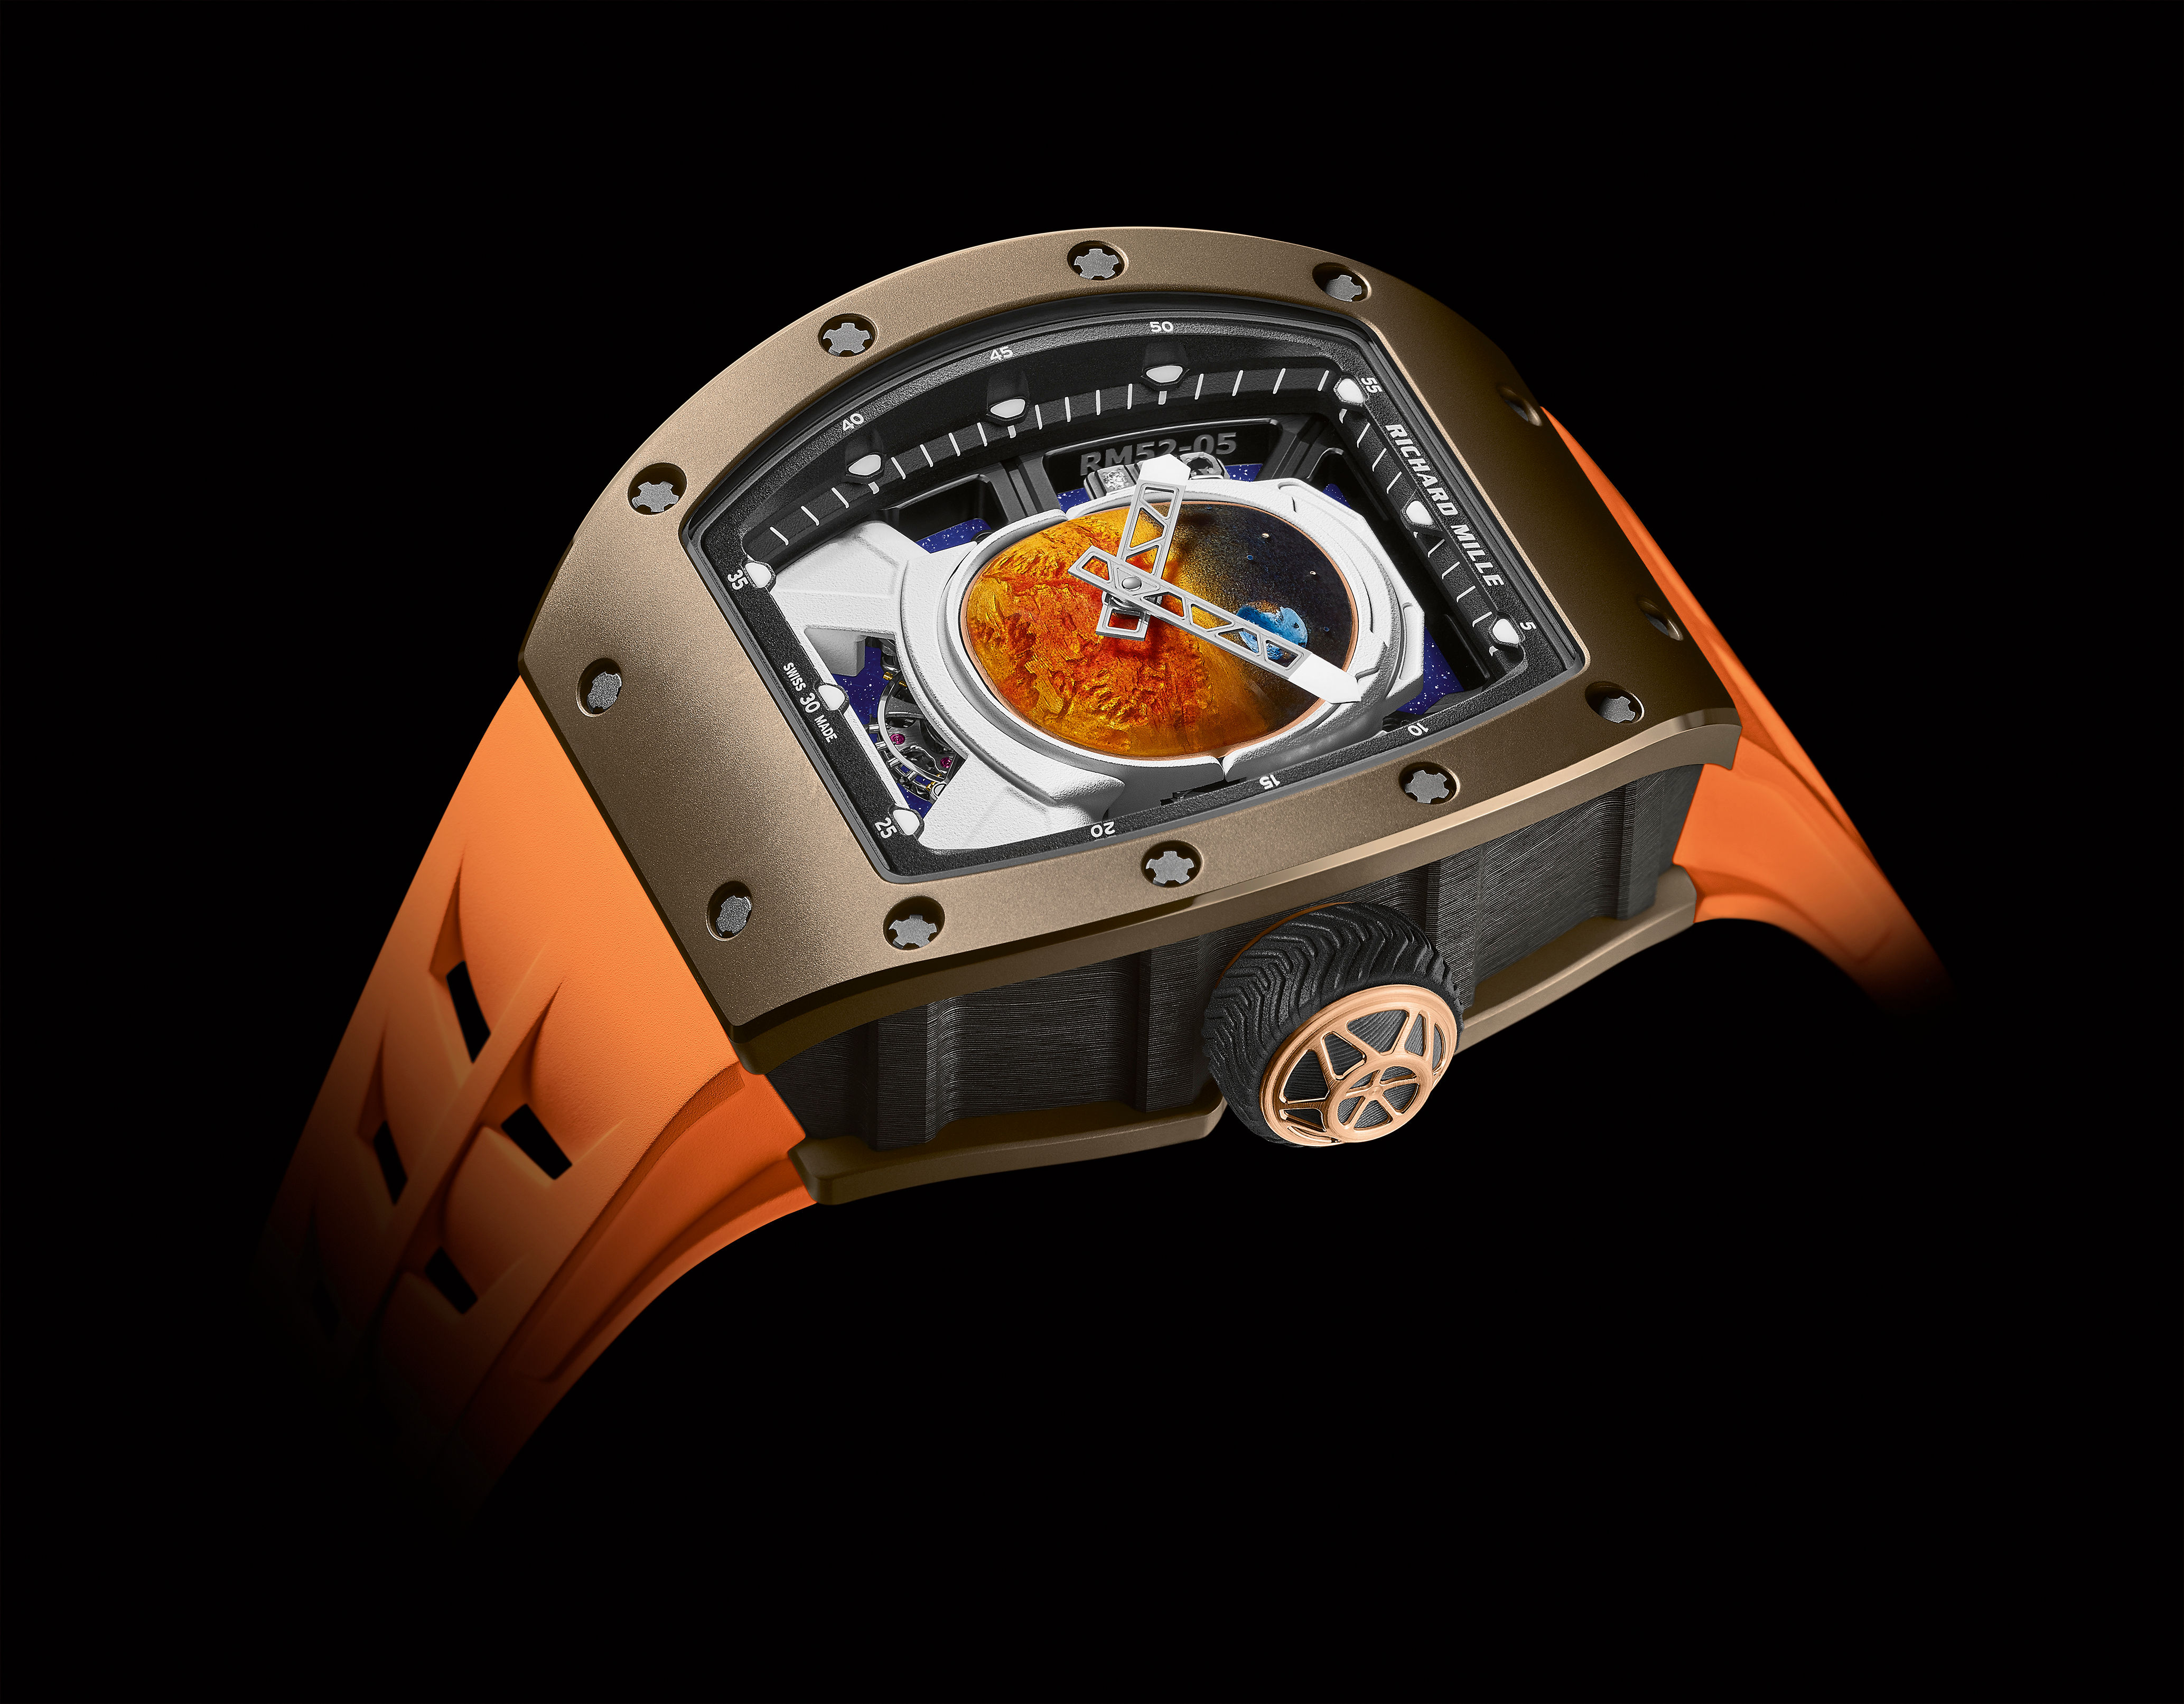 Meet the RM52-05, Pharrell Williams’ timepiece with Richard Mille